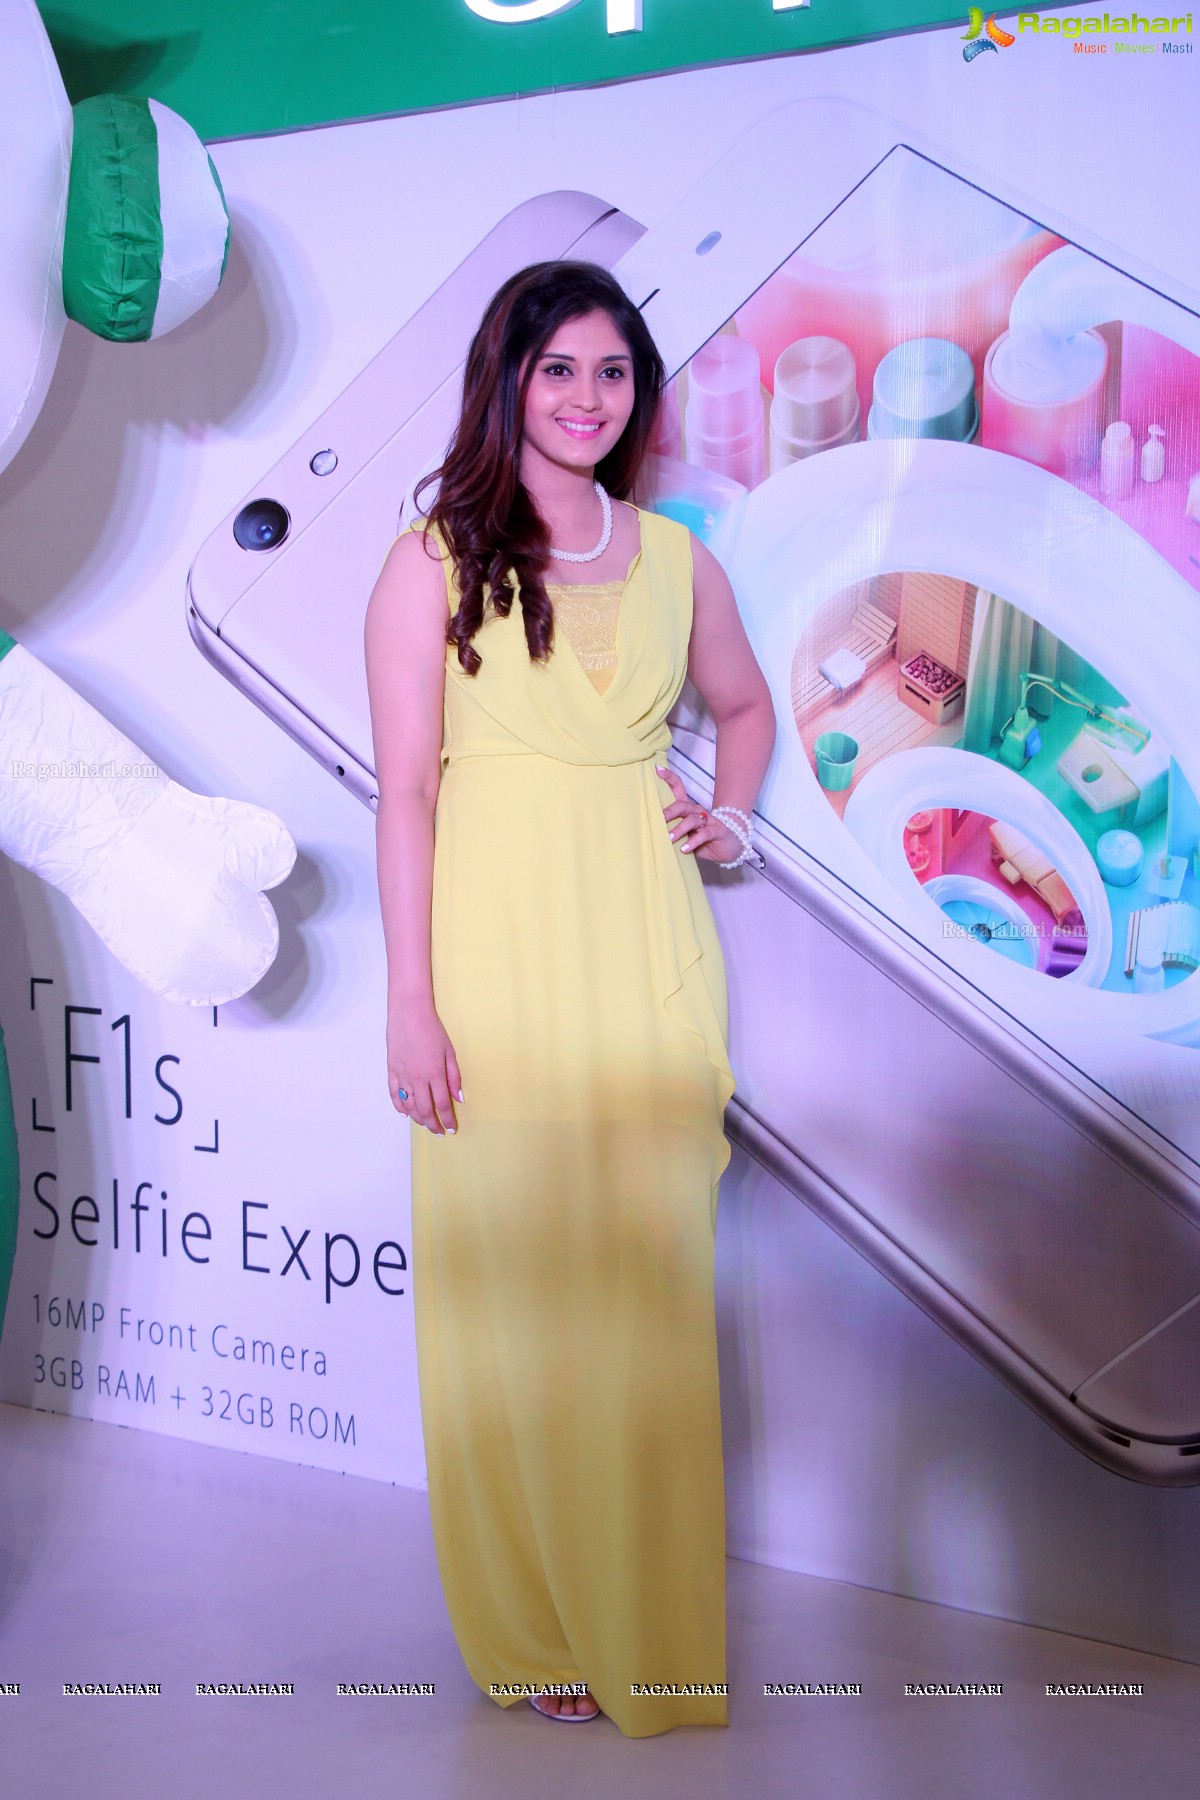 Surbhi at Oppo F1s Mobile Launch, Hyderabad, Photo Gallery